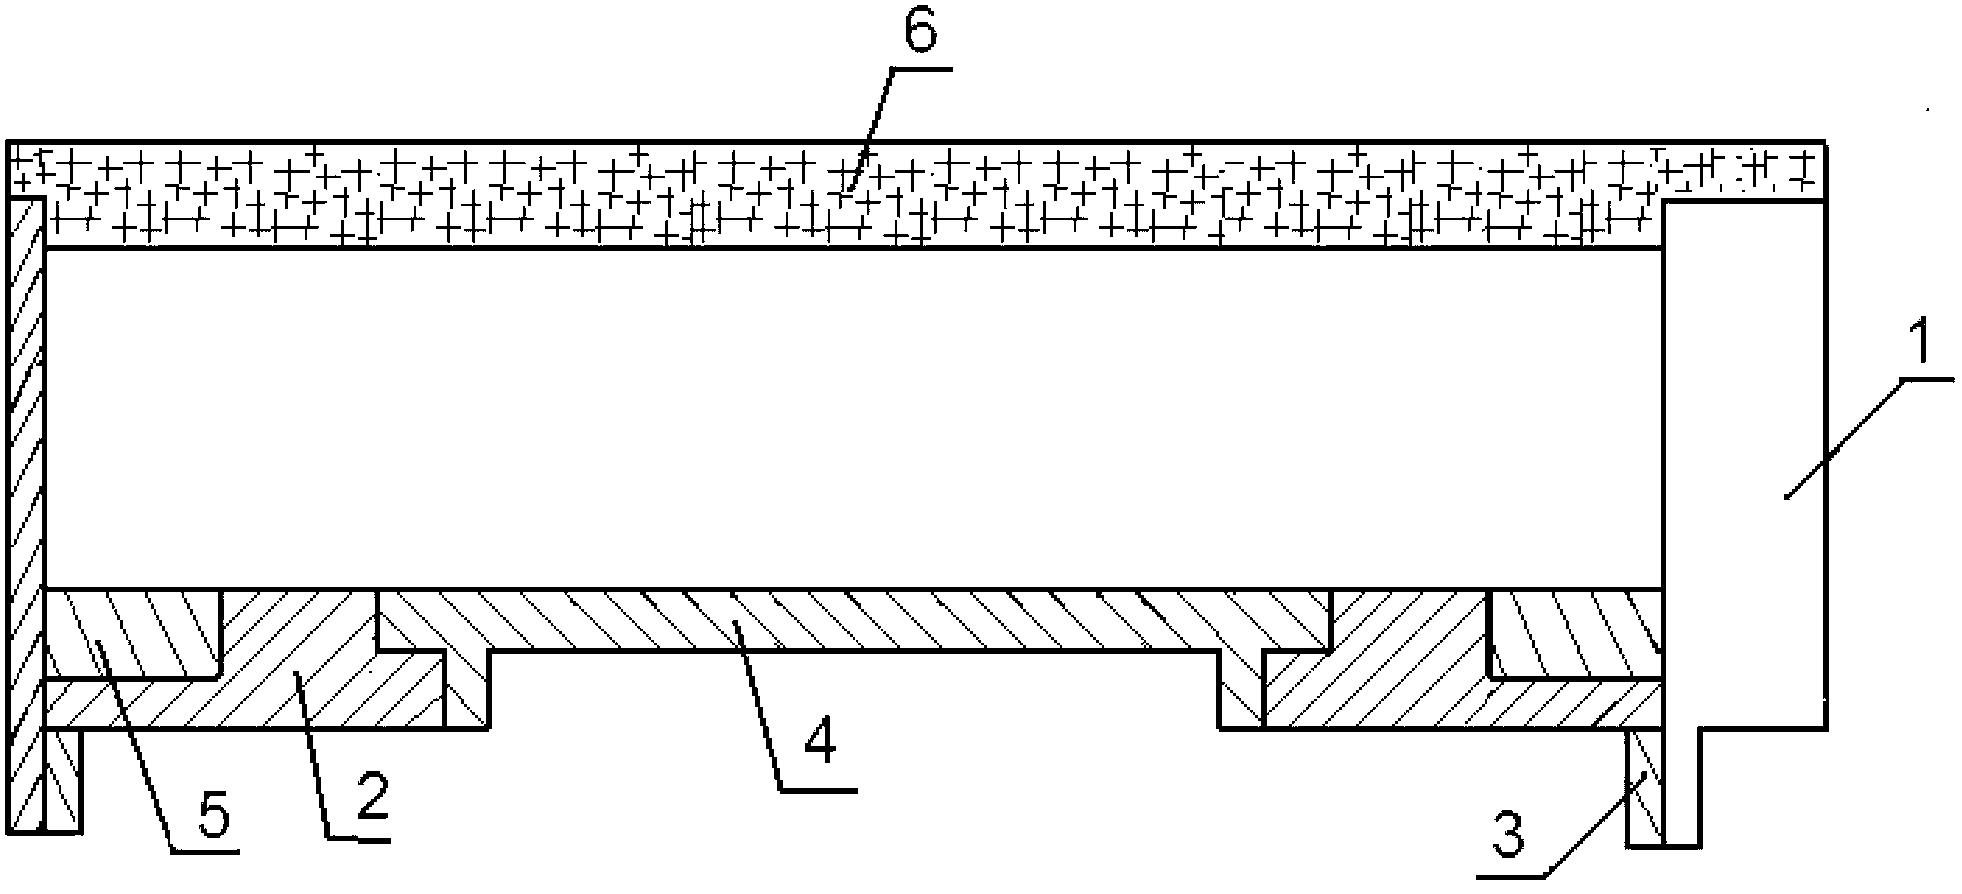 Device for measuring optical performance of material under strong laser condition